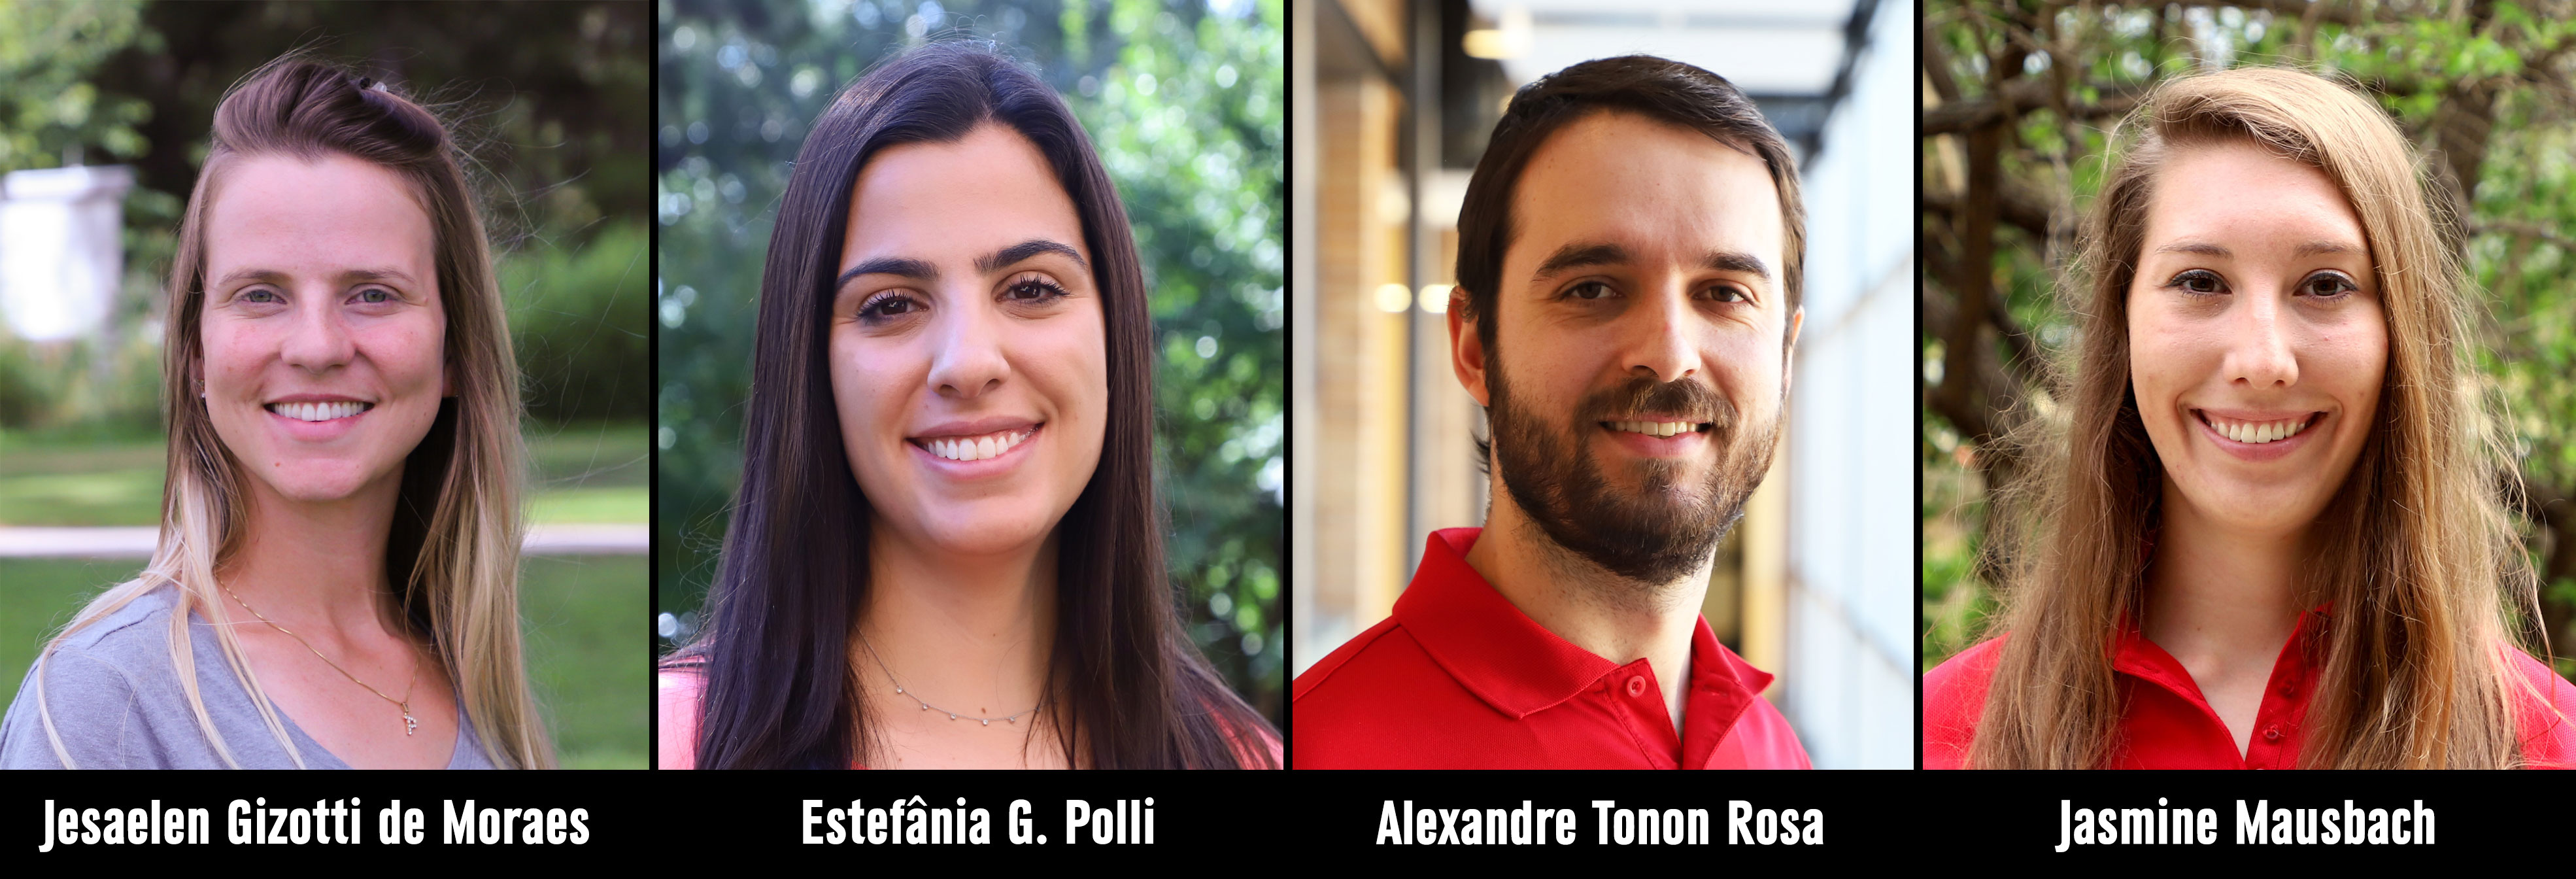 Agronomy graduate students Jesaelen Gizotti de Moraes, left, Estefânia G. Polli, Alexandre Tonon Rosa and Jasmine Mausbach earn top honors at the 2018 North Central Weed Science Society Meeting held Dec. 4-6 in Milwaukee, Wisconsin. 